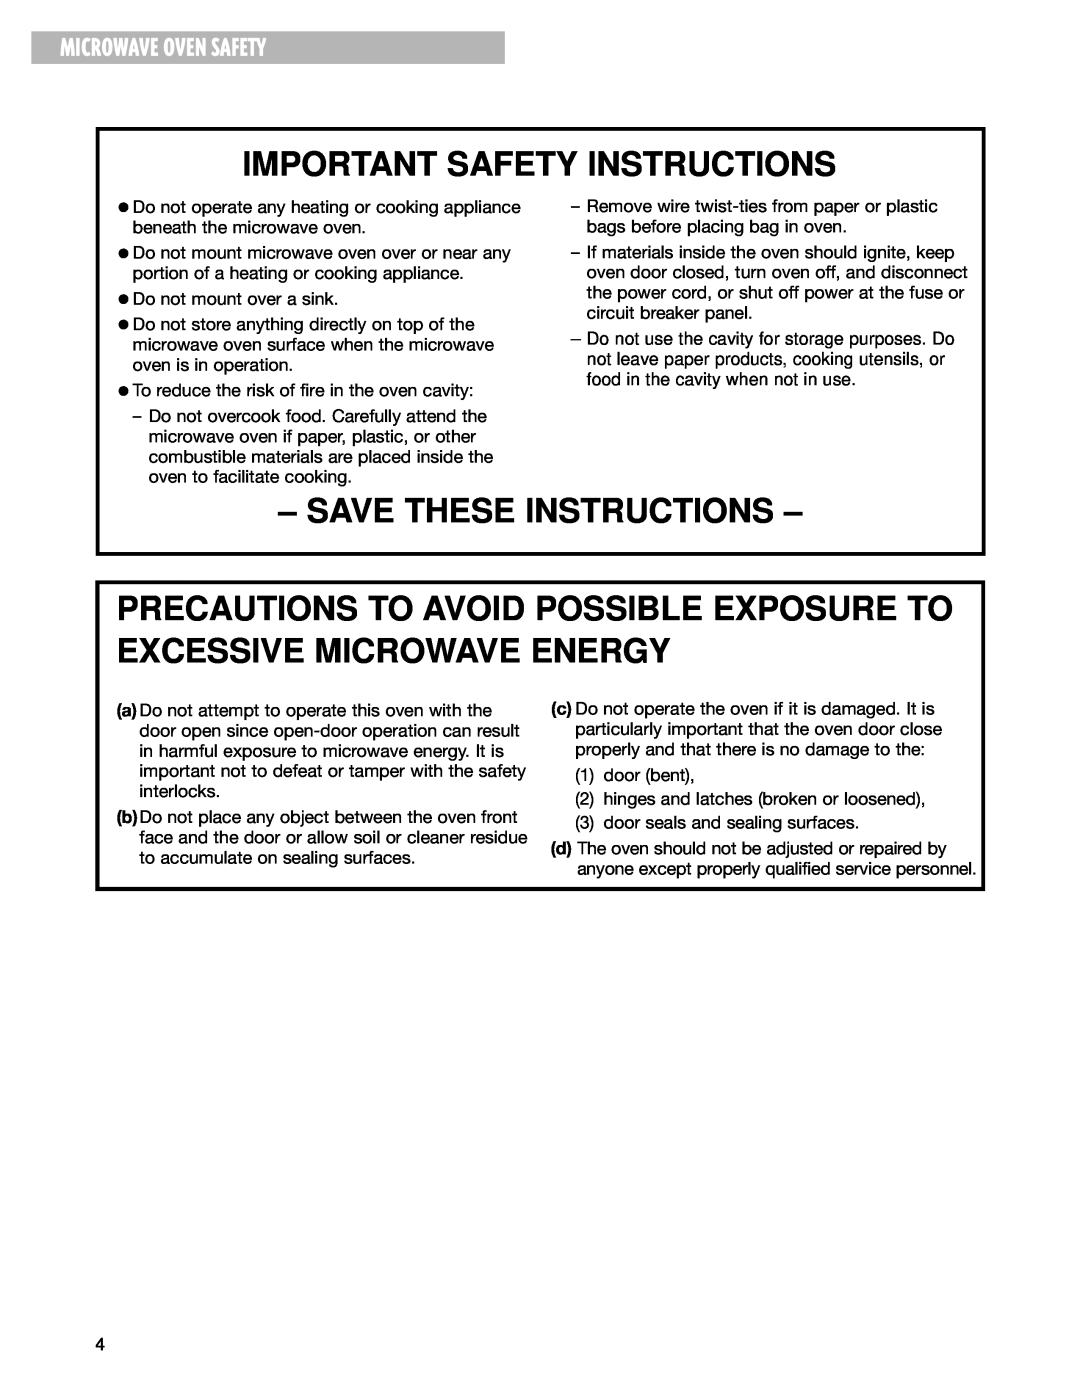 Whirlpool MT1100SH Precautions To Avoid Possible Exposure To Excessive Microwave Energy, Microwave Oven Safety 